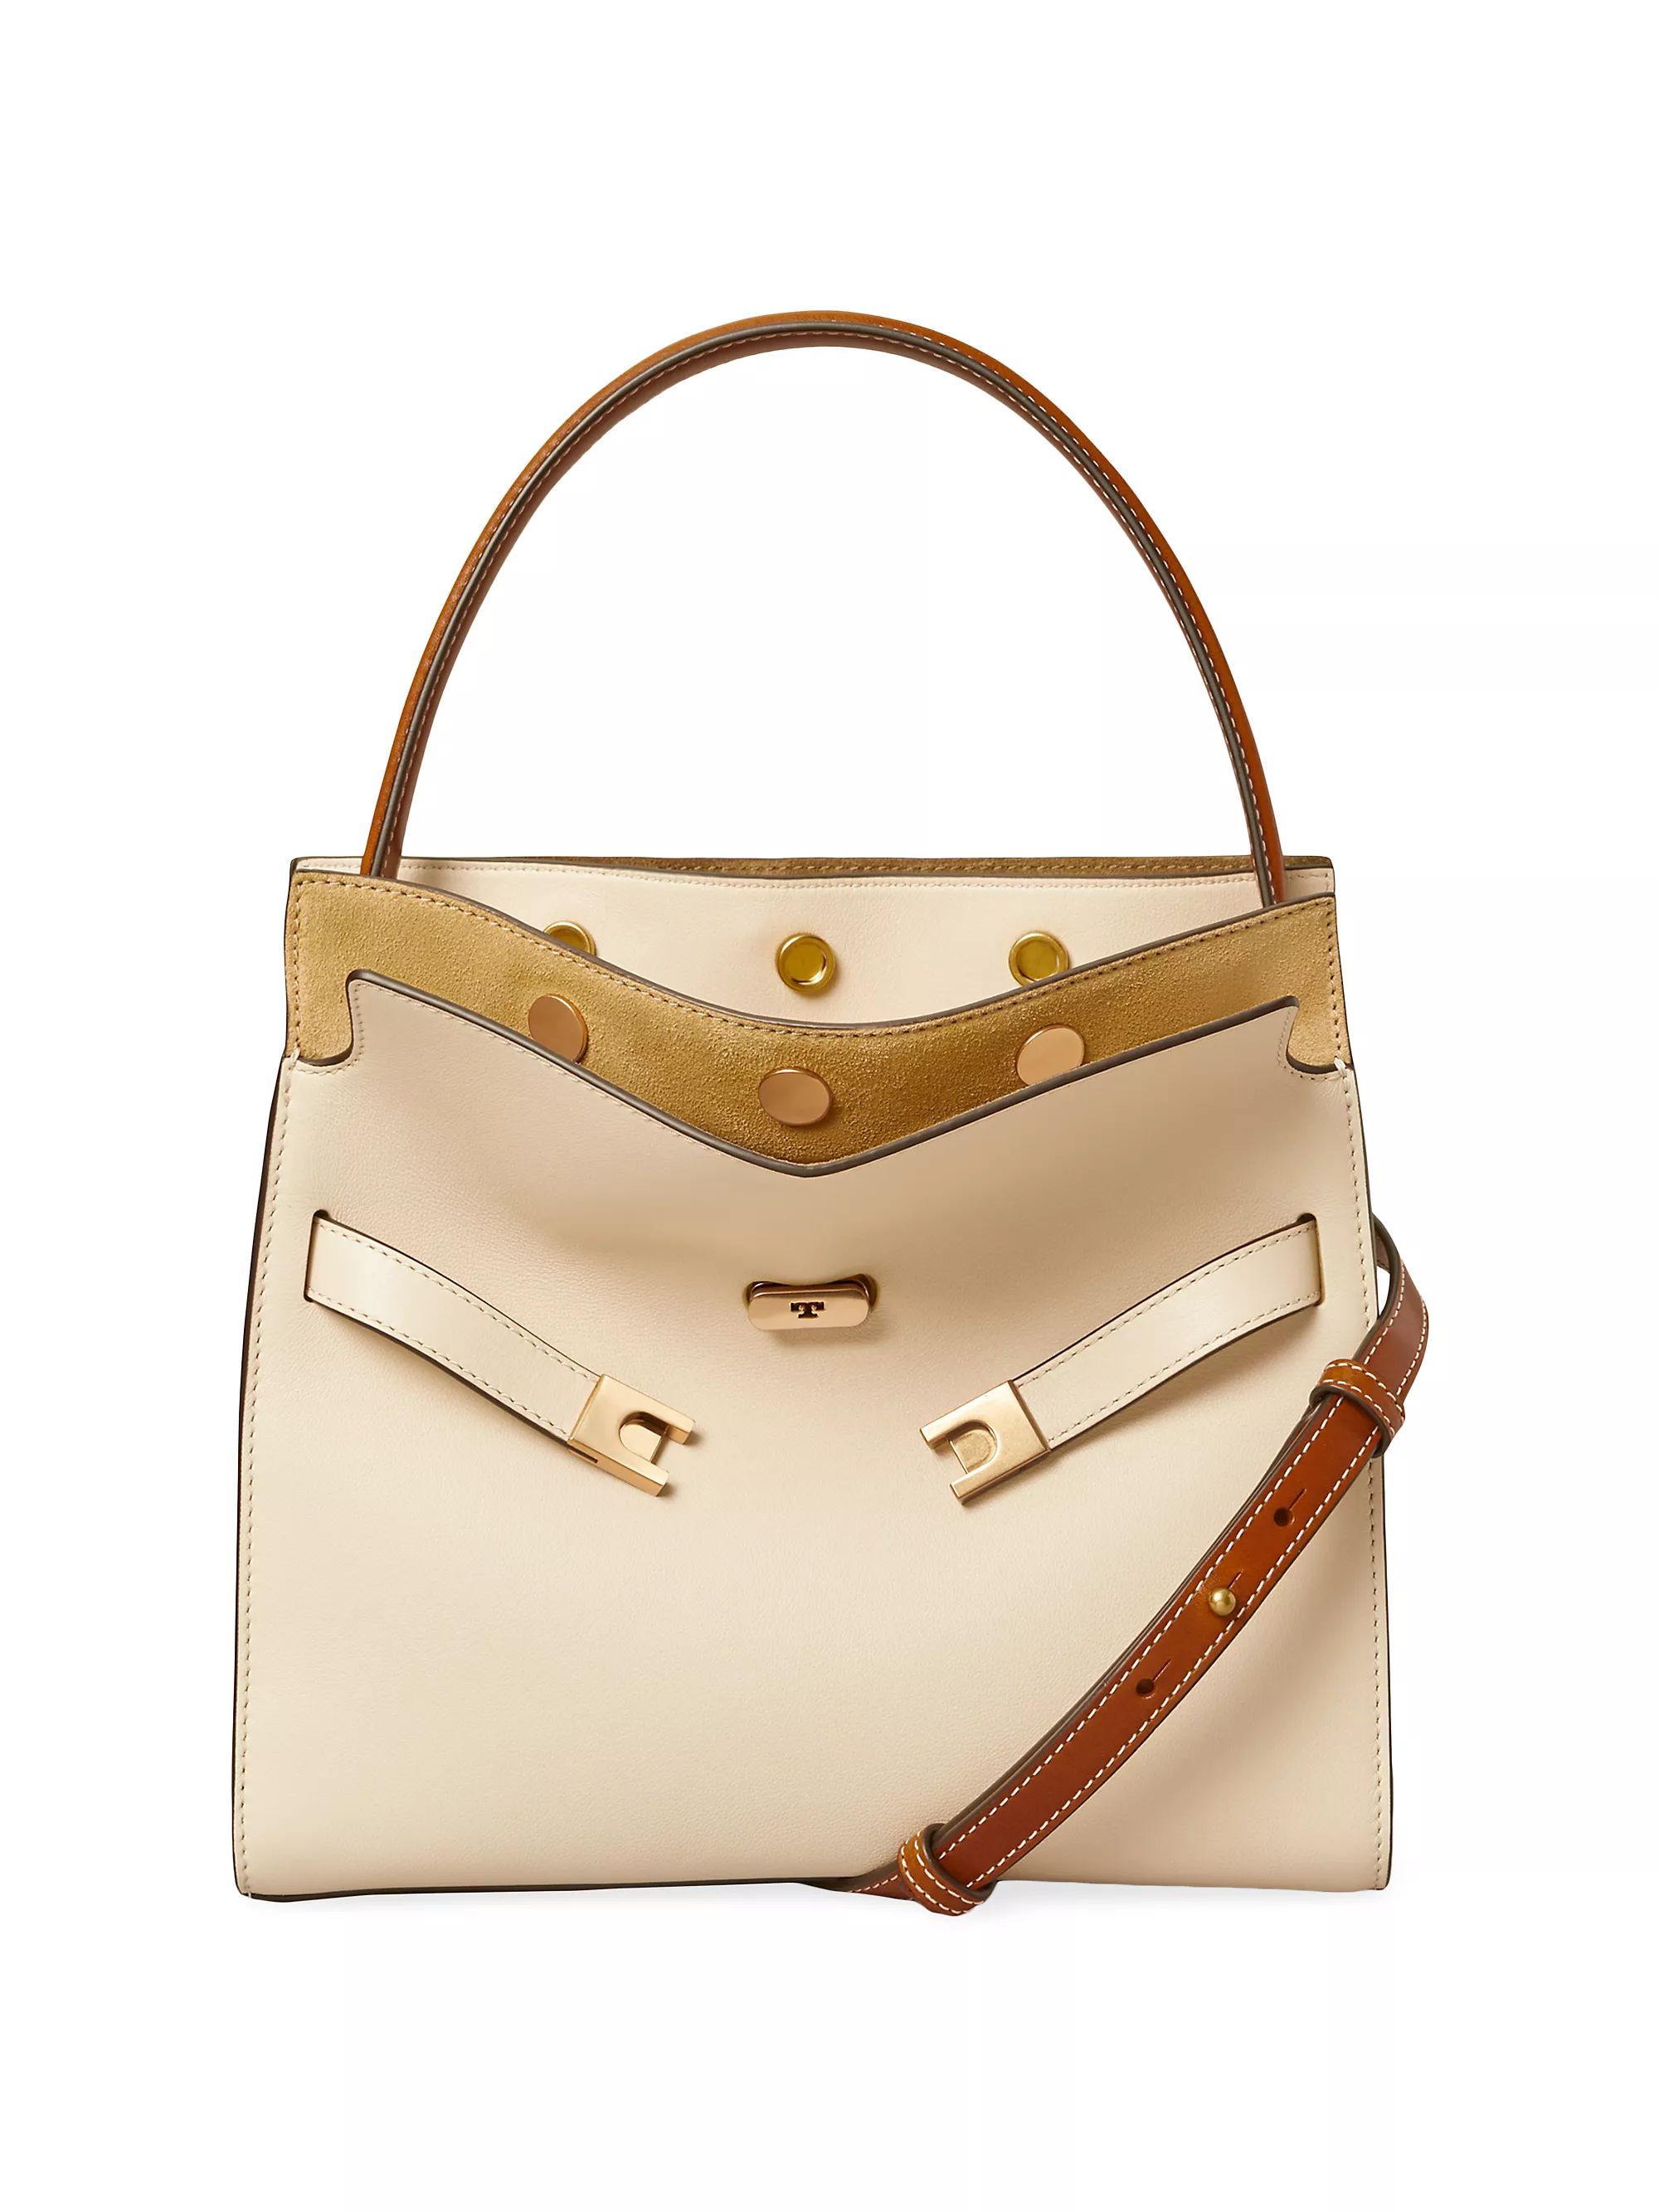 Lee Radziwill Small Double Leather Bag | Saks Fifth Avenue